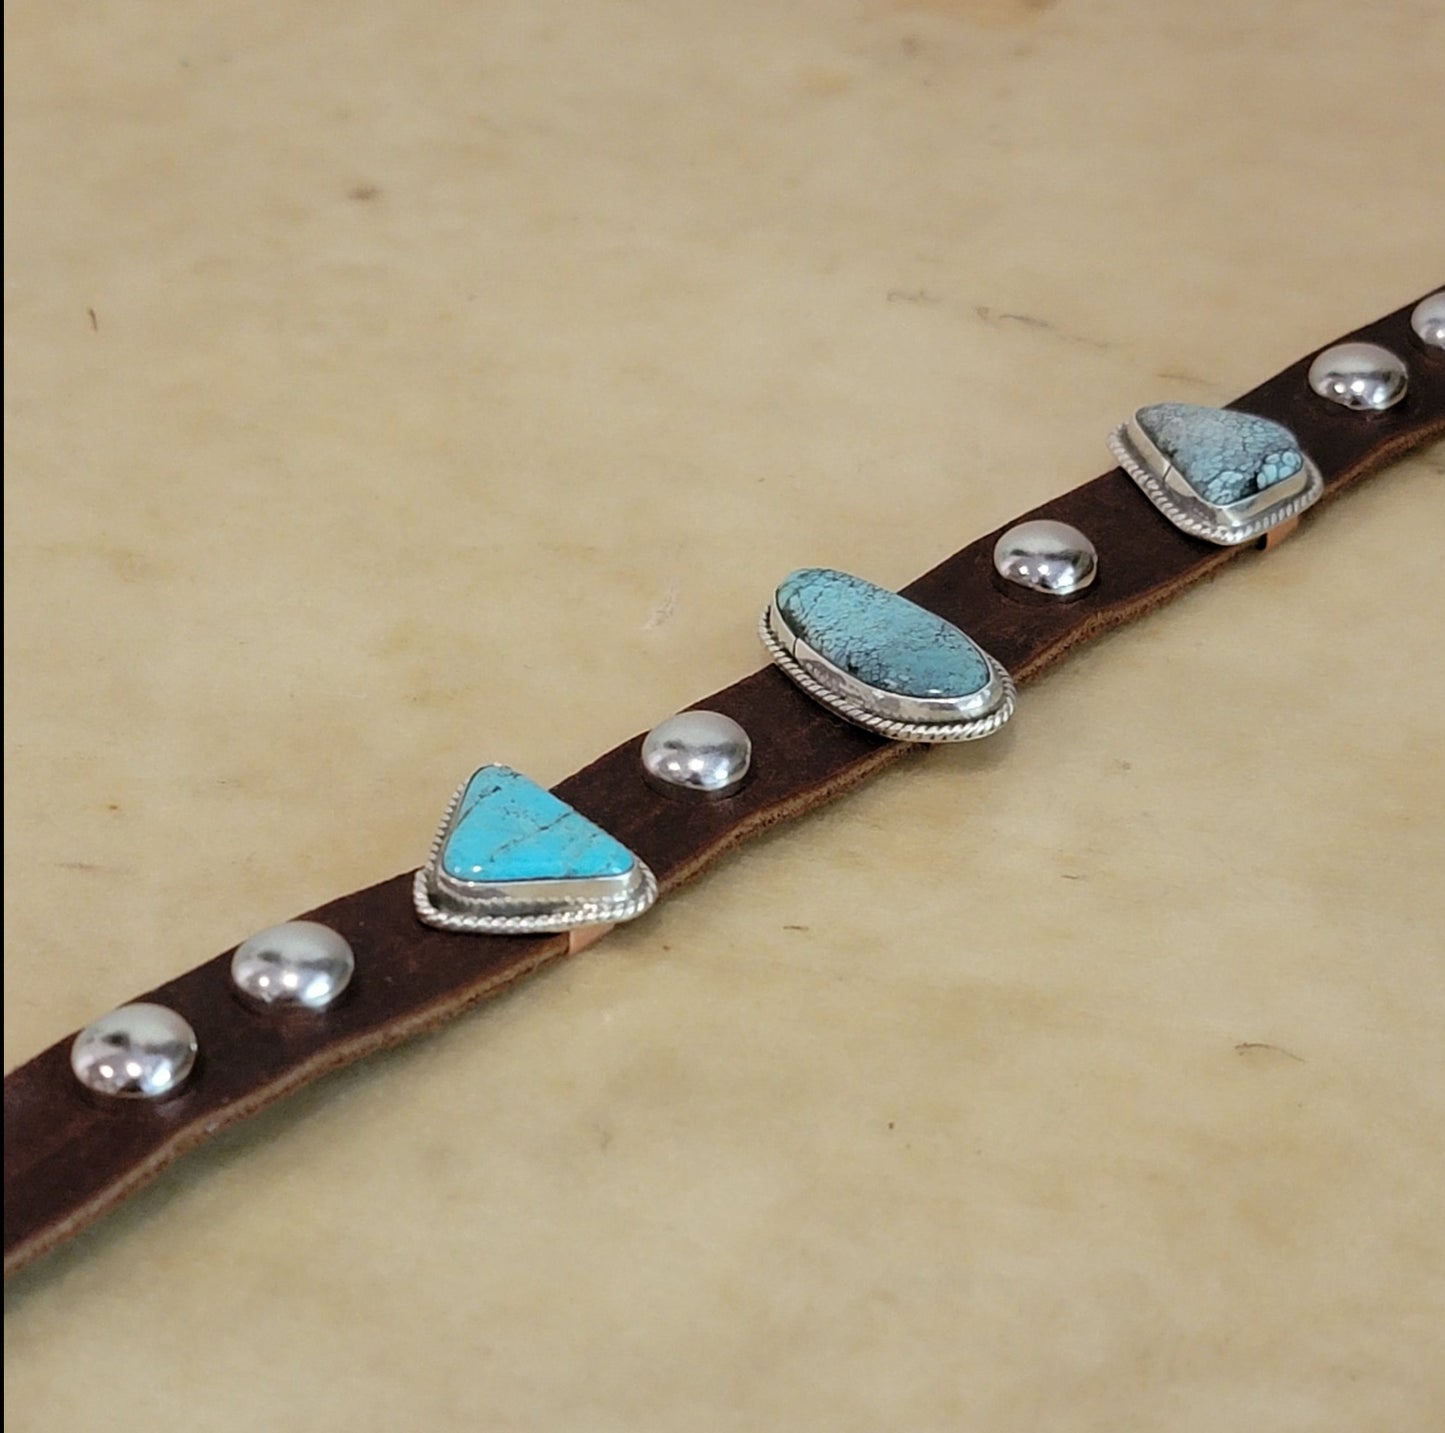 Navajo Turquoise and Sterling Silver on Leather Dog Collar Indian Jewelry